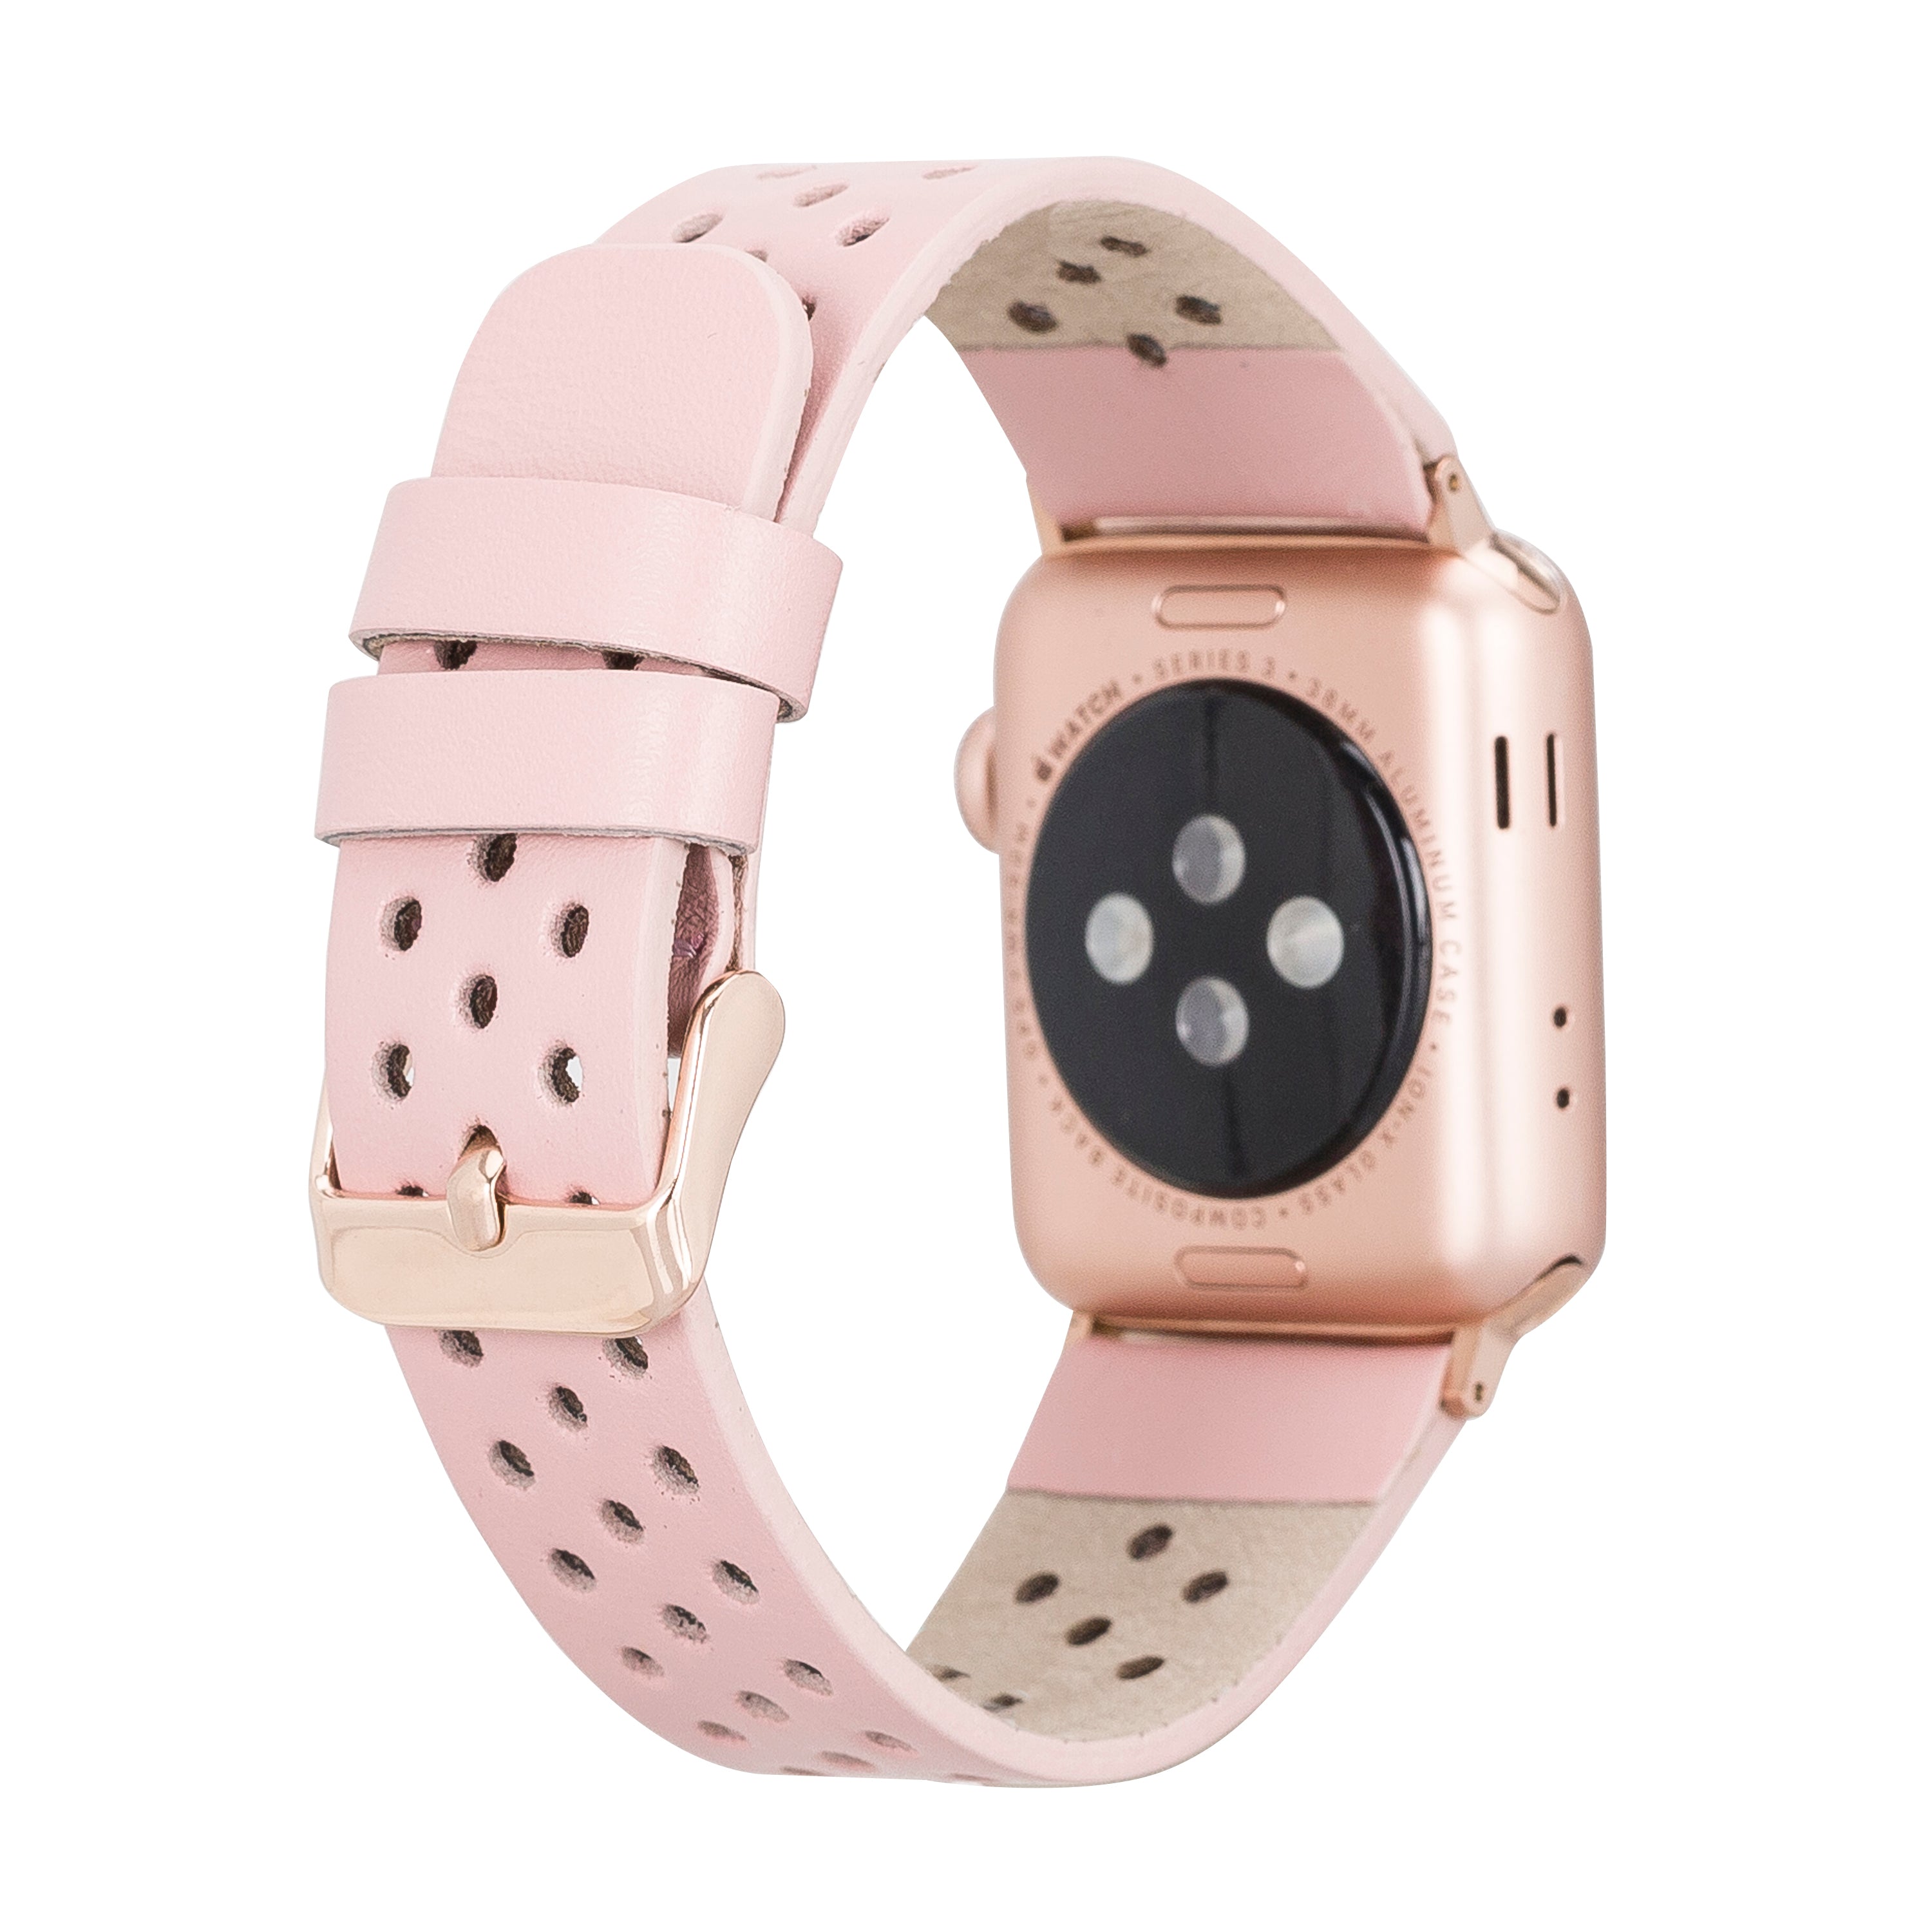 DelfiCase Chester Watch Band for Apple Watch & Fitbit Versa/Sense (Pink) 2